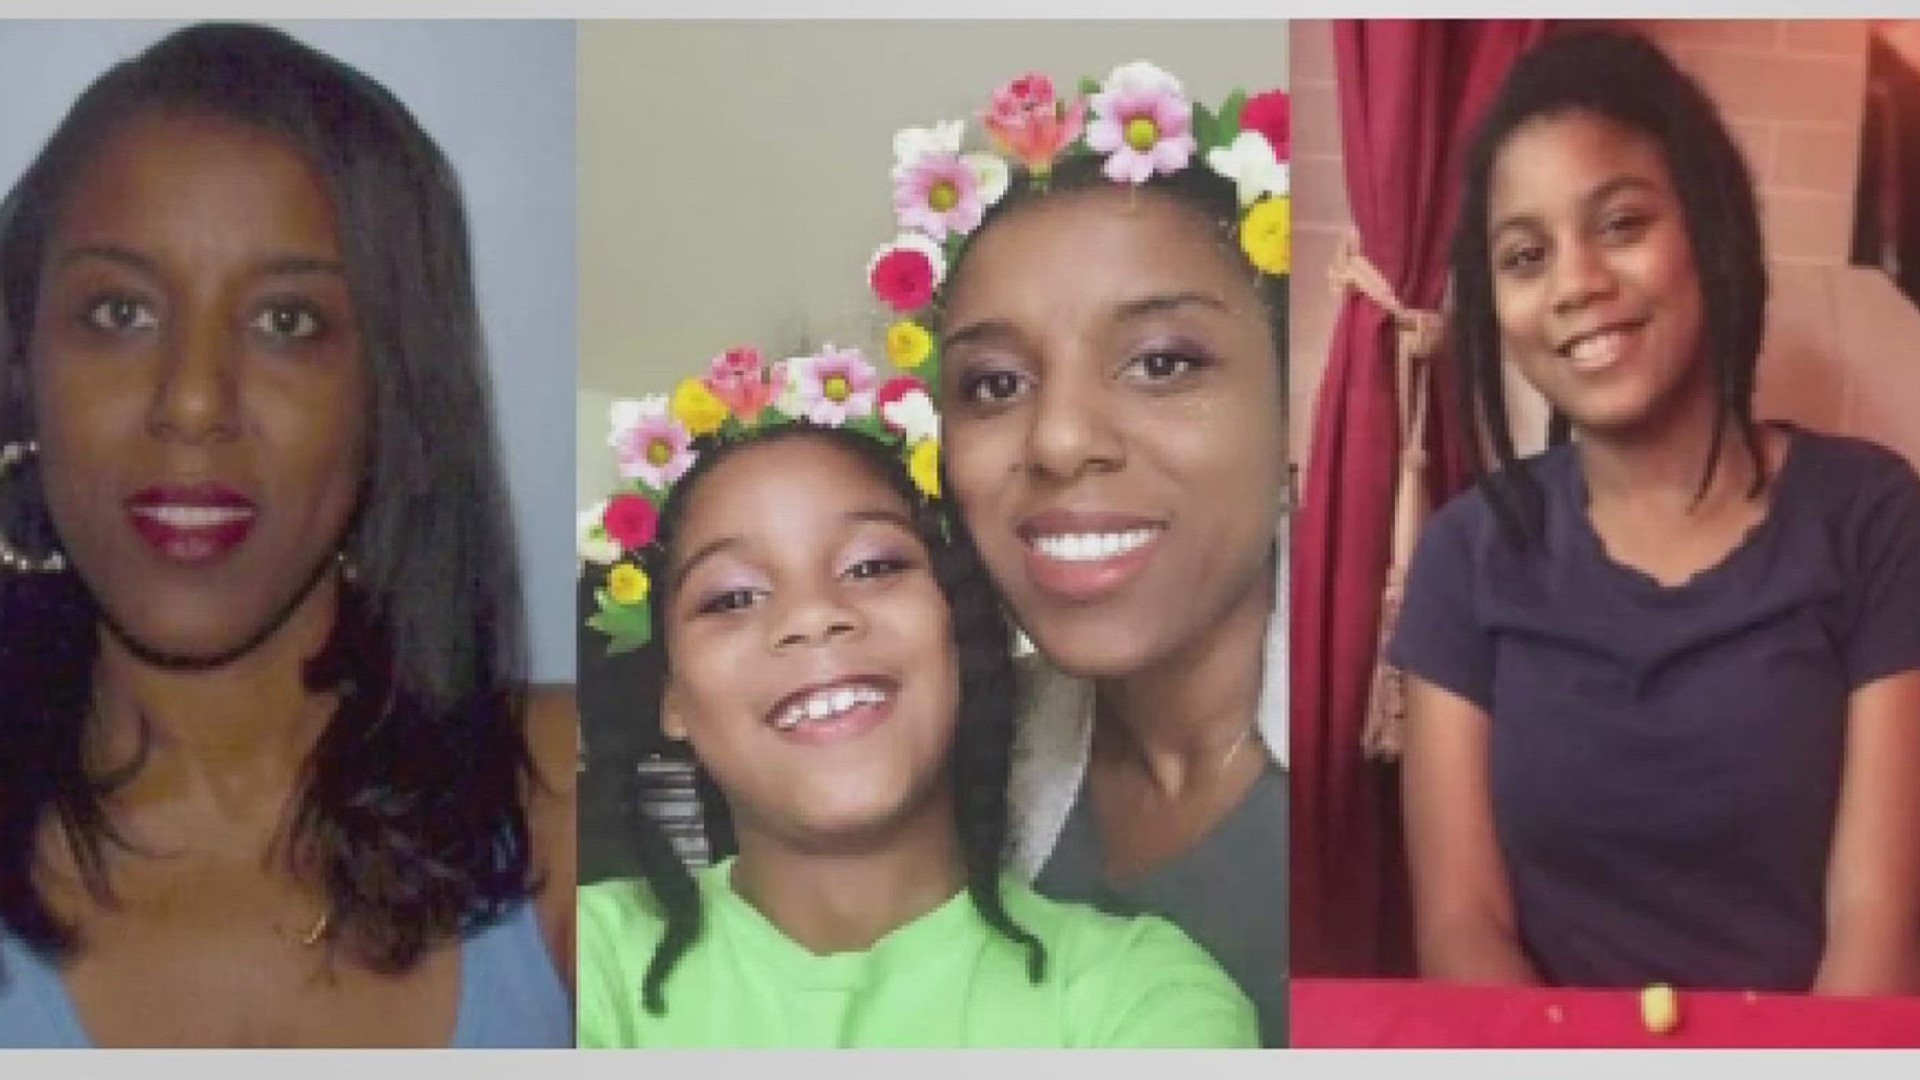 The 11-year-old girl's mother is wanted for custody interference. They were last seen in August 2022.